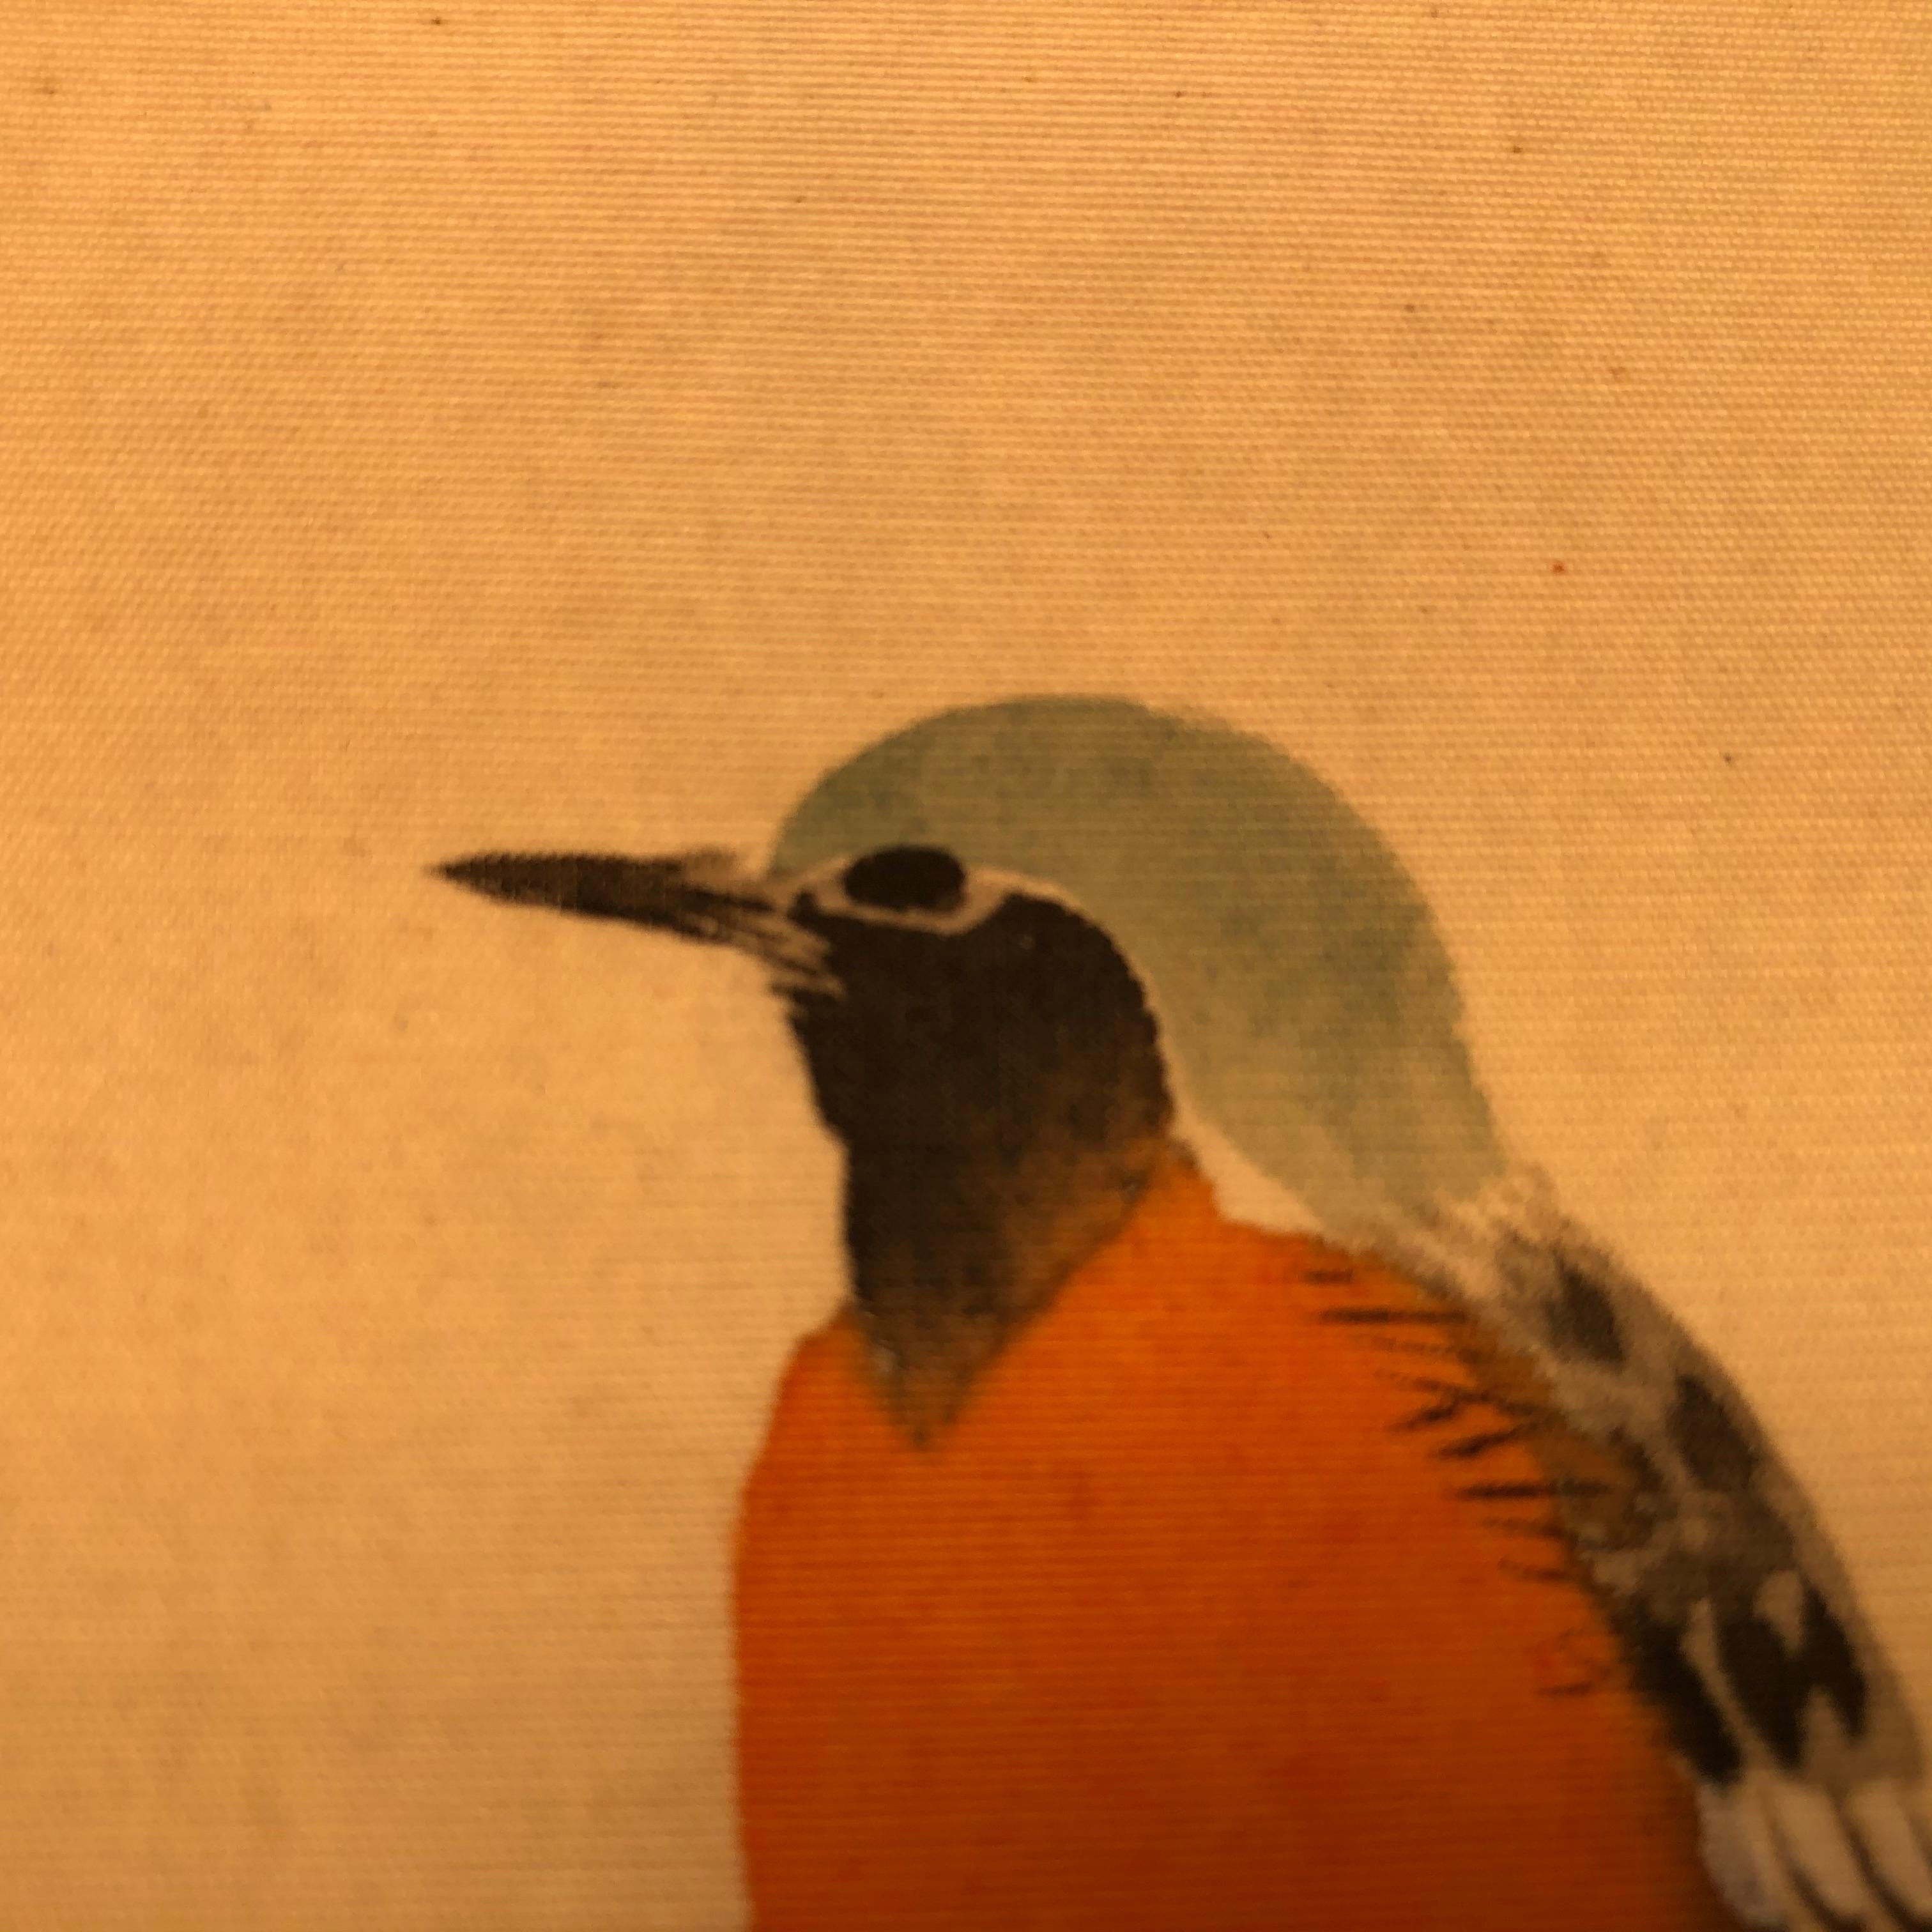 From our recent Japanese Acquisition Travels

A beautiful and compelling Japanese antique hand painted painting of a singing warbler bird - ready to mount in your favorite frame and proudly display or give as a unique gift. .

Hand painting on